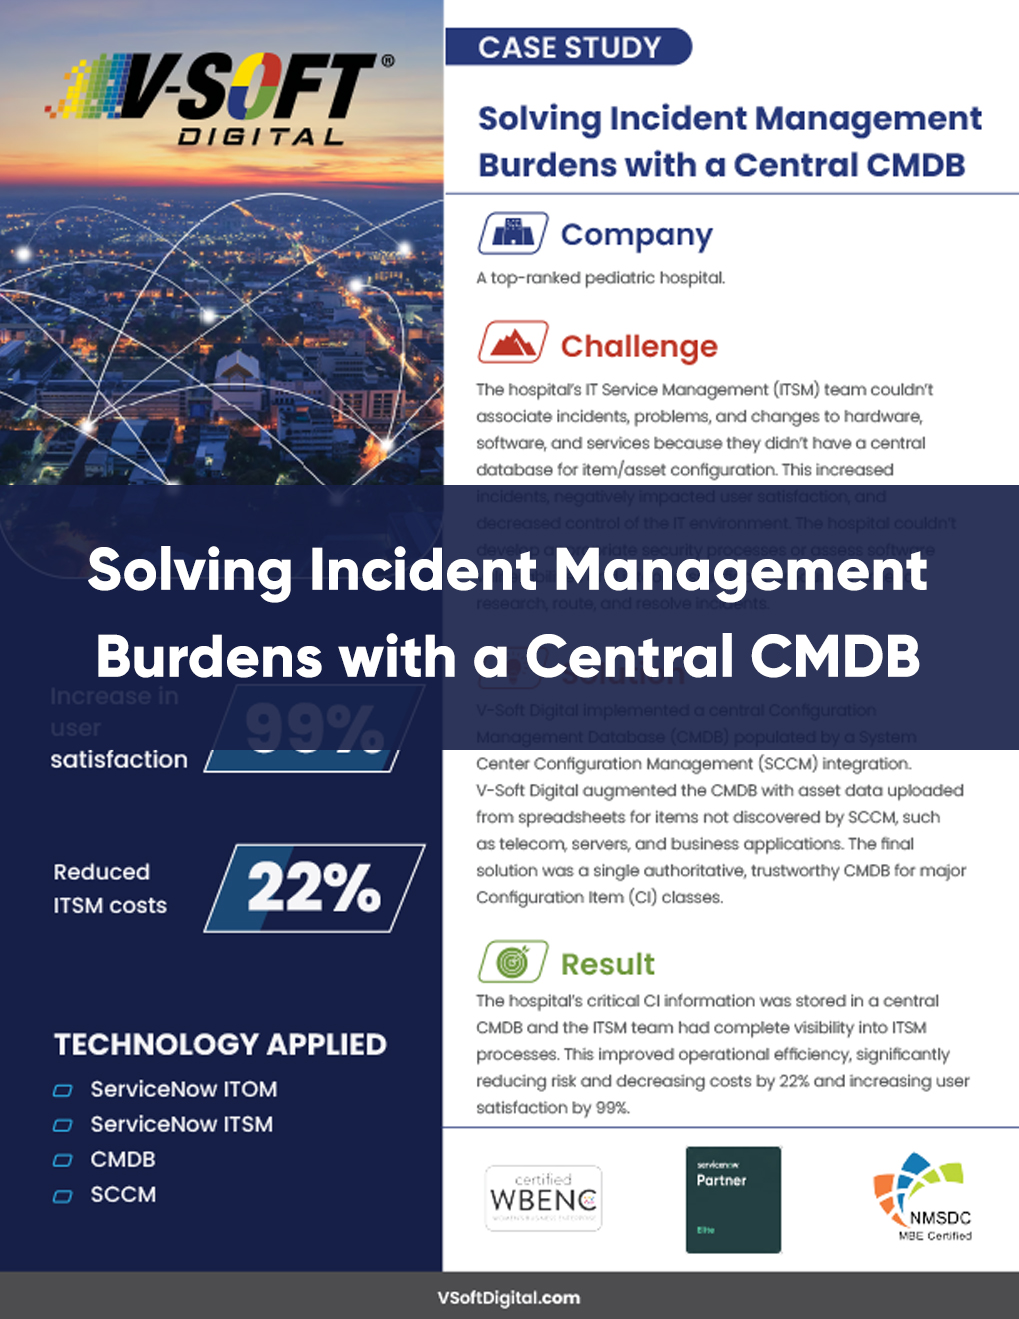 Solving Incident Management Burdens with a Central CMDB